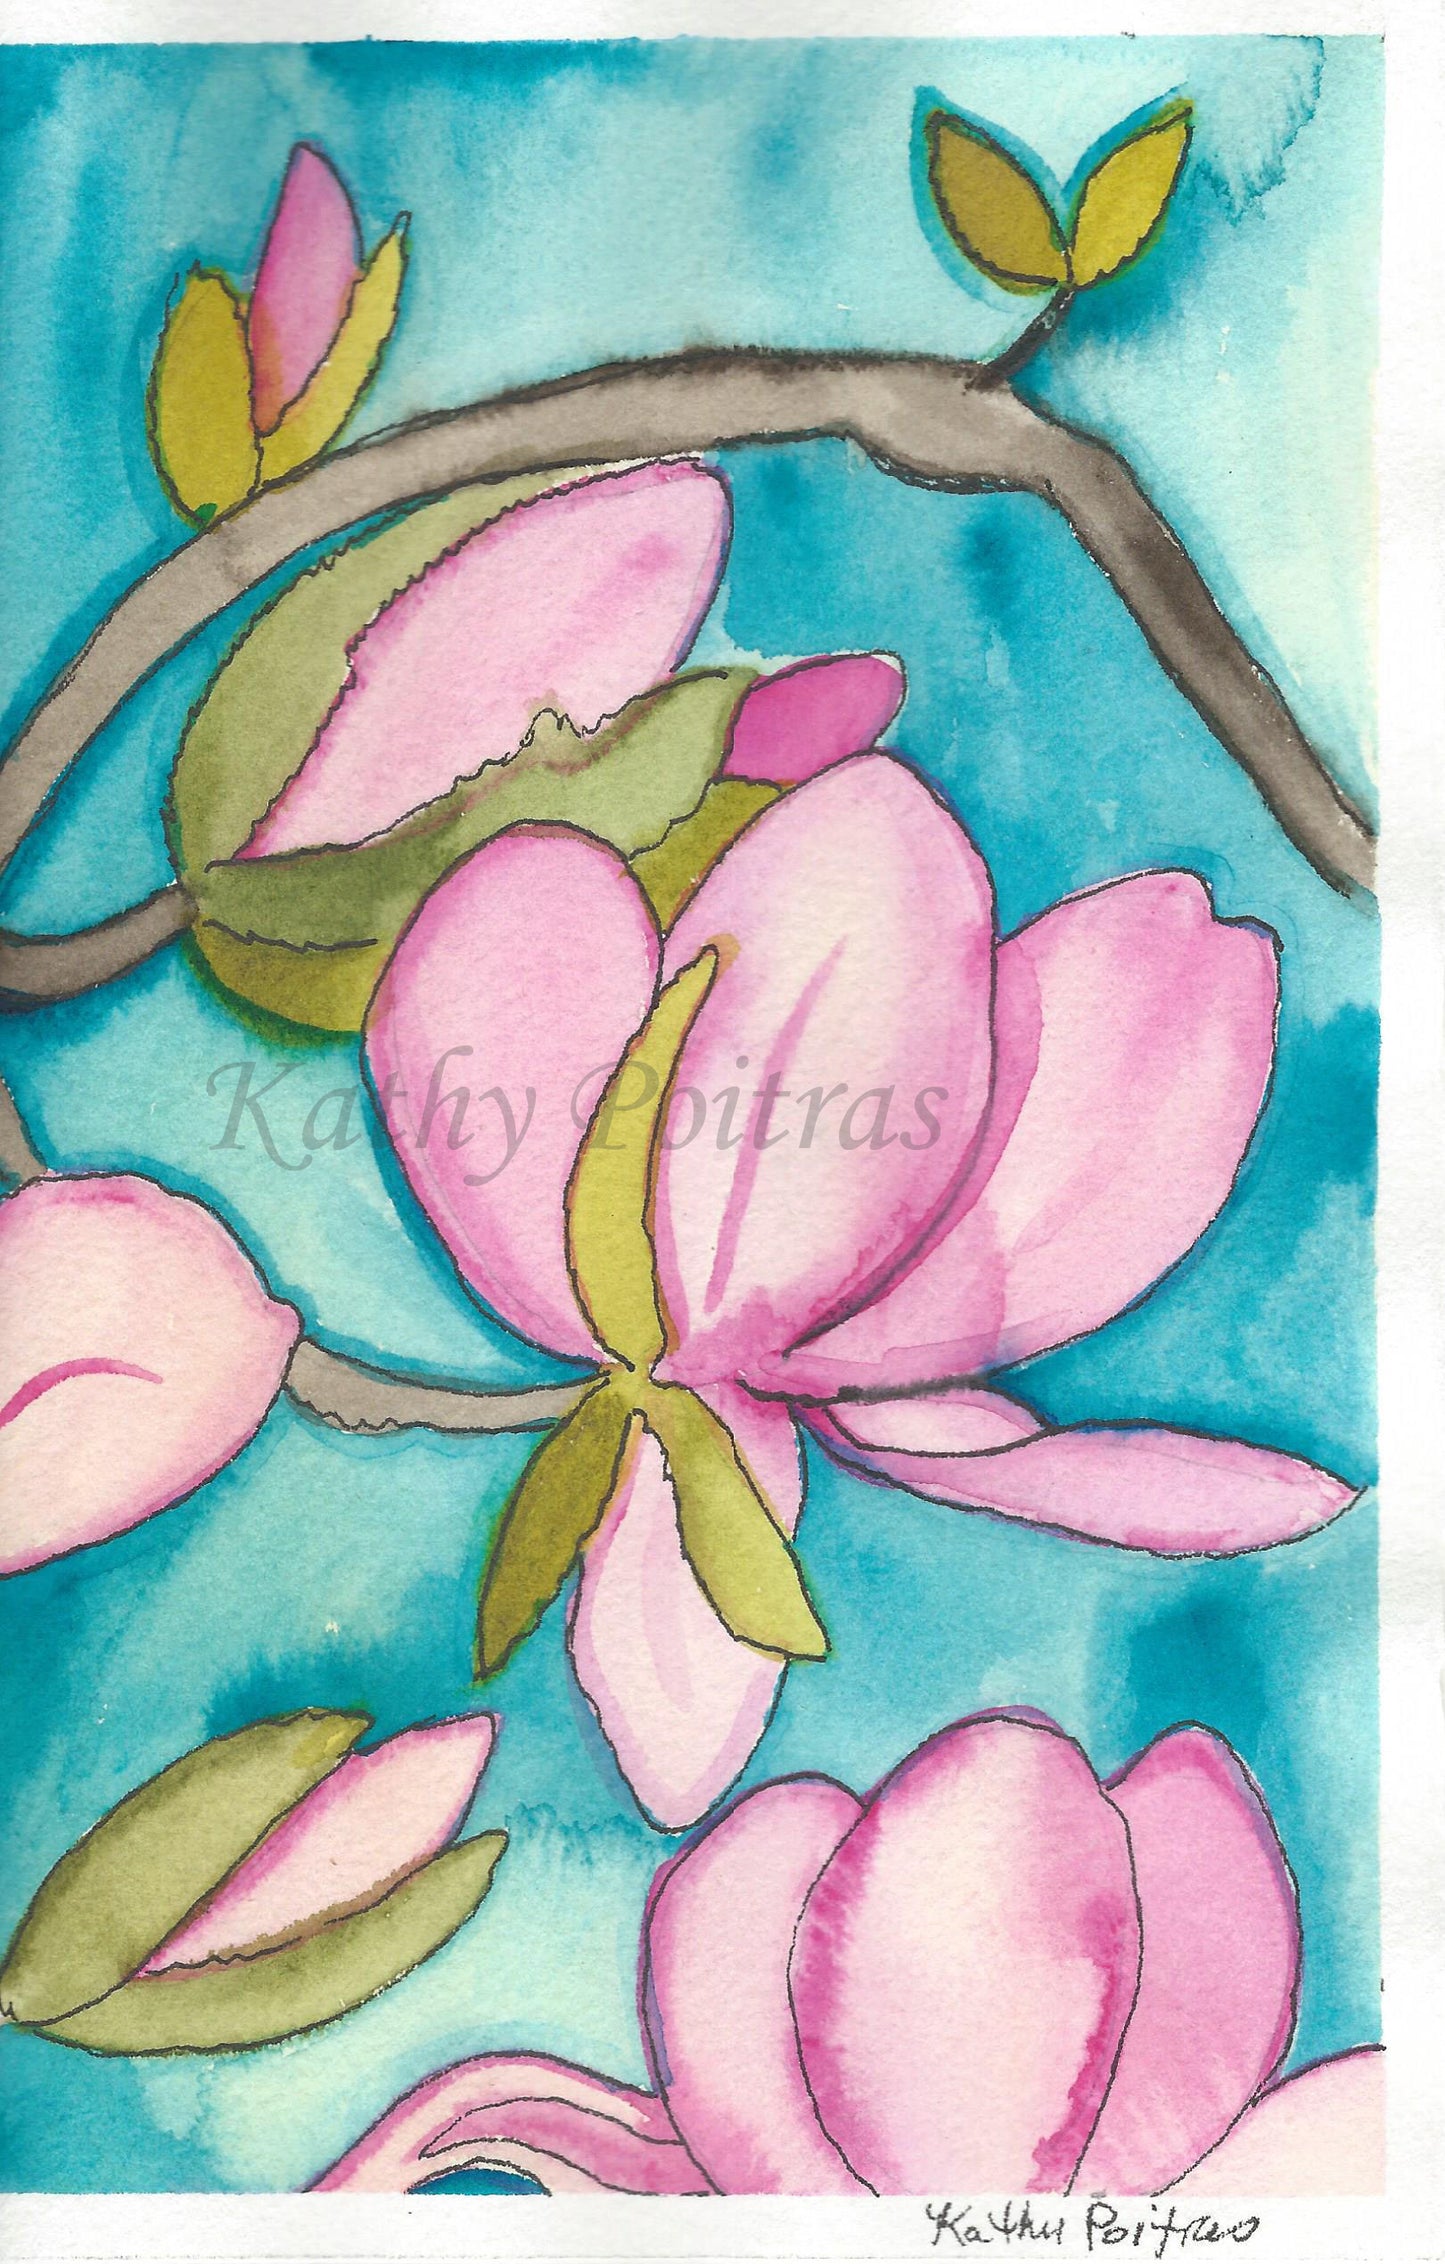 Large pink magnolia Blossoms. Inspired by Spring 2021.   Original hand painted  greeting card.  Watercolor and ink on arches 140 lb rough watercolor paper.  By Canadian artist Kathy Poitras.  